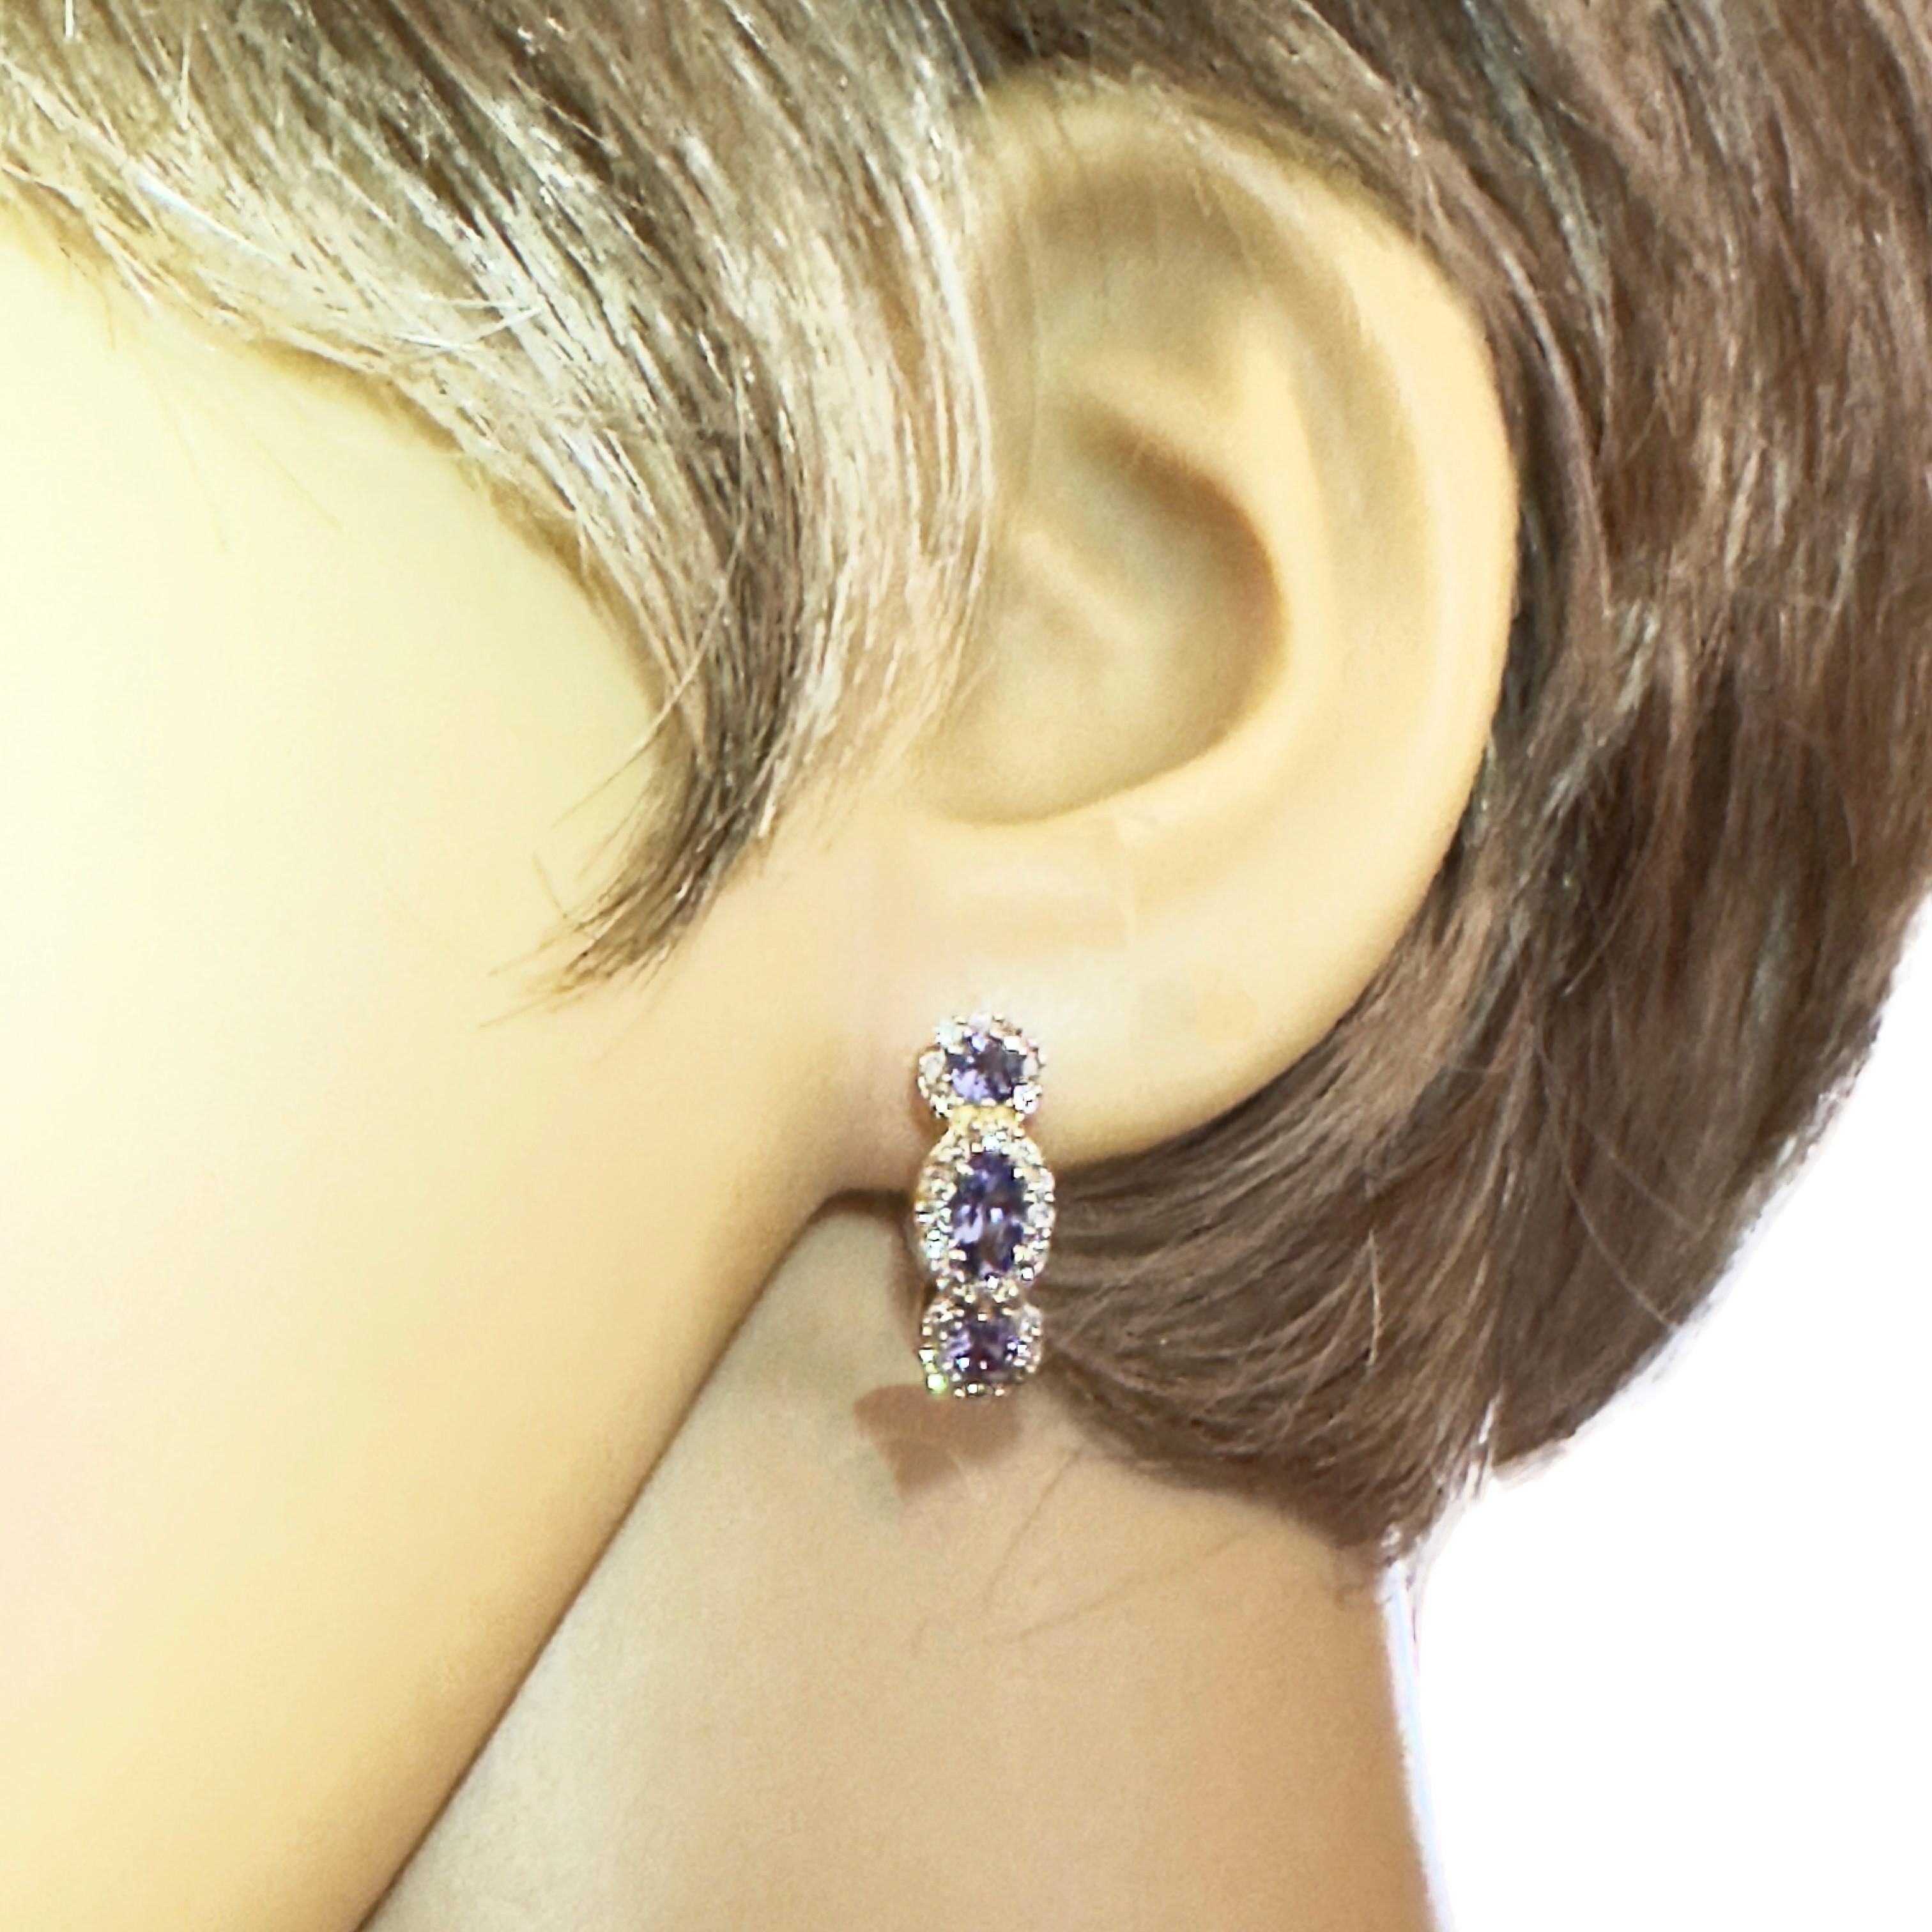 I love these earrings.  The color is just beautiful.  The tanzanites total 1 .05 carats and there are is 1 oval cut and 2 brilliant cut stones in each earring.  Please see the appraisal for measurements.  There are also 25 brilliant cut diamonds in